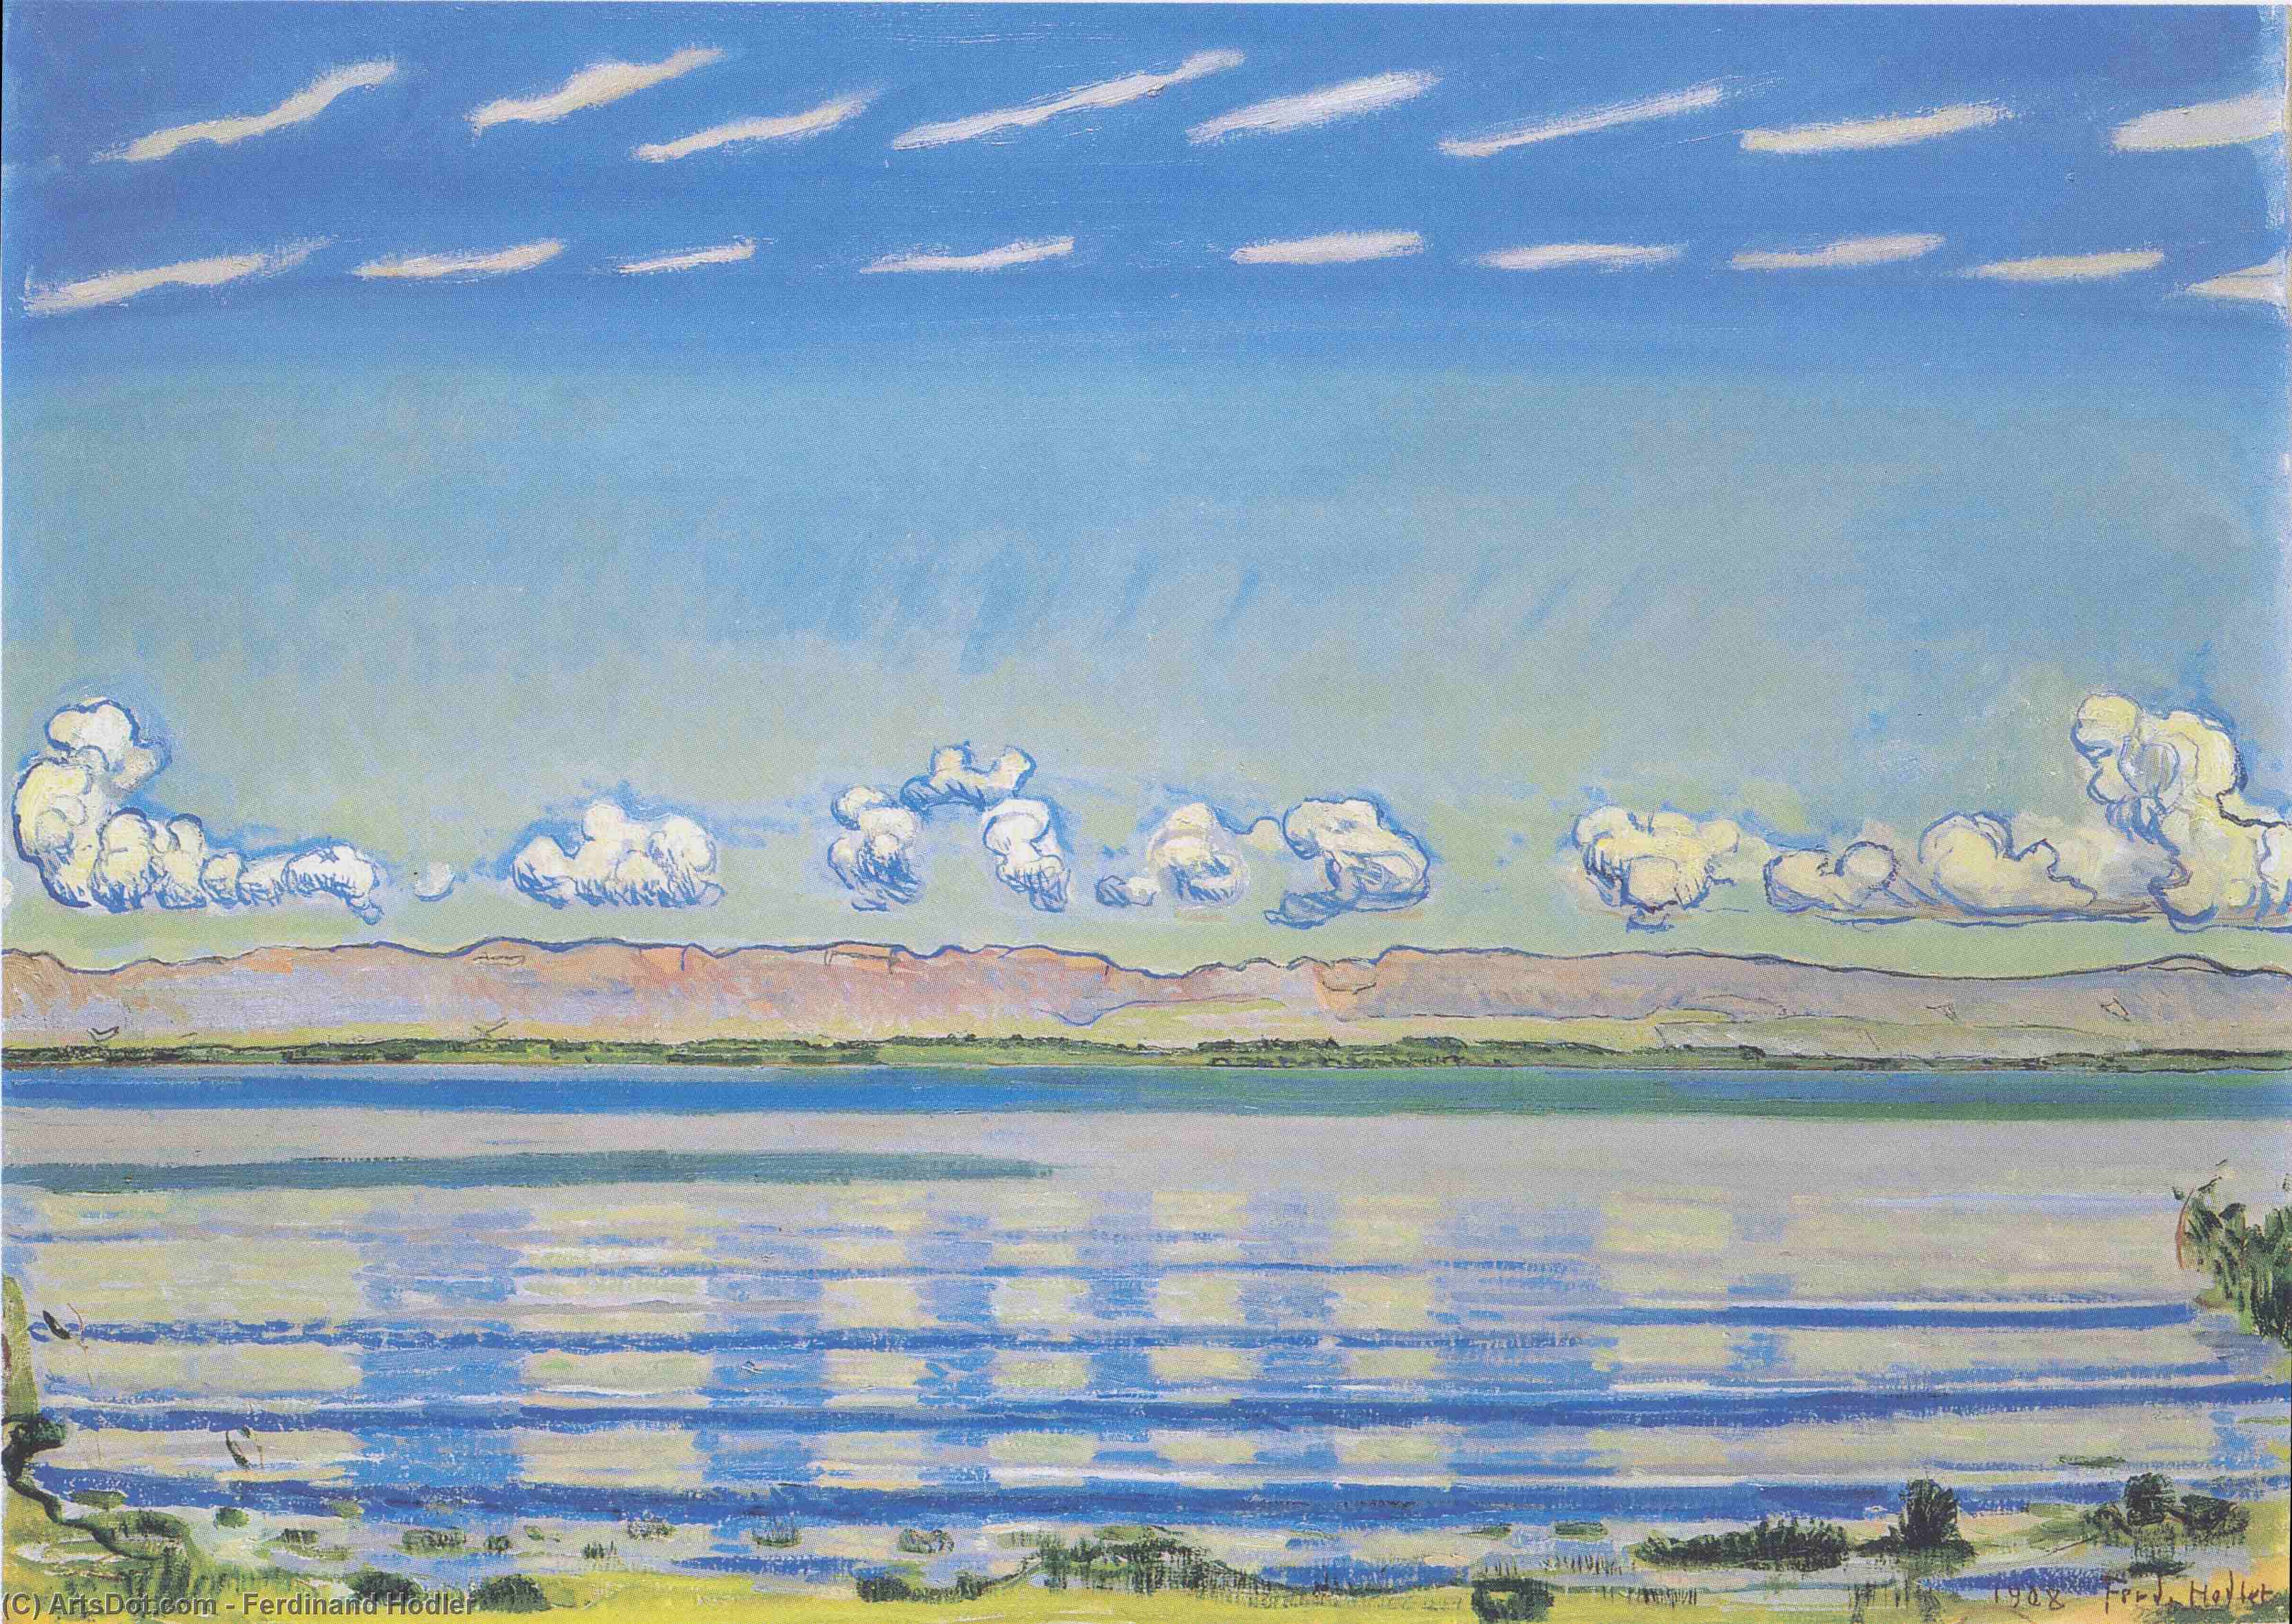 Buy Museum Art Reproductions On Lake Geneva (also known as Landscape with Rhythmic Shapes), 1908 by Ferdinand Hodler (1853-1918, Switzerland) | ArtsDot.com